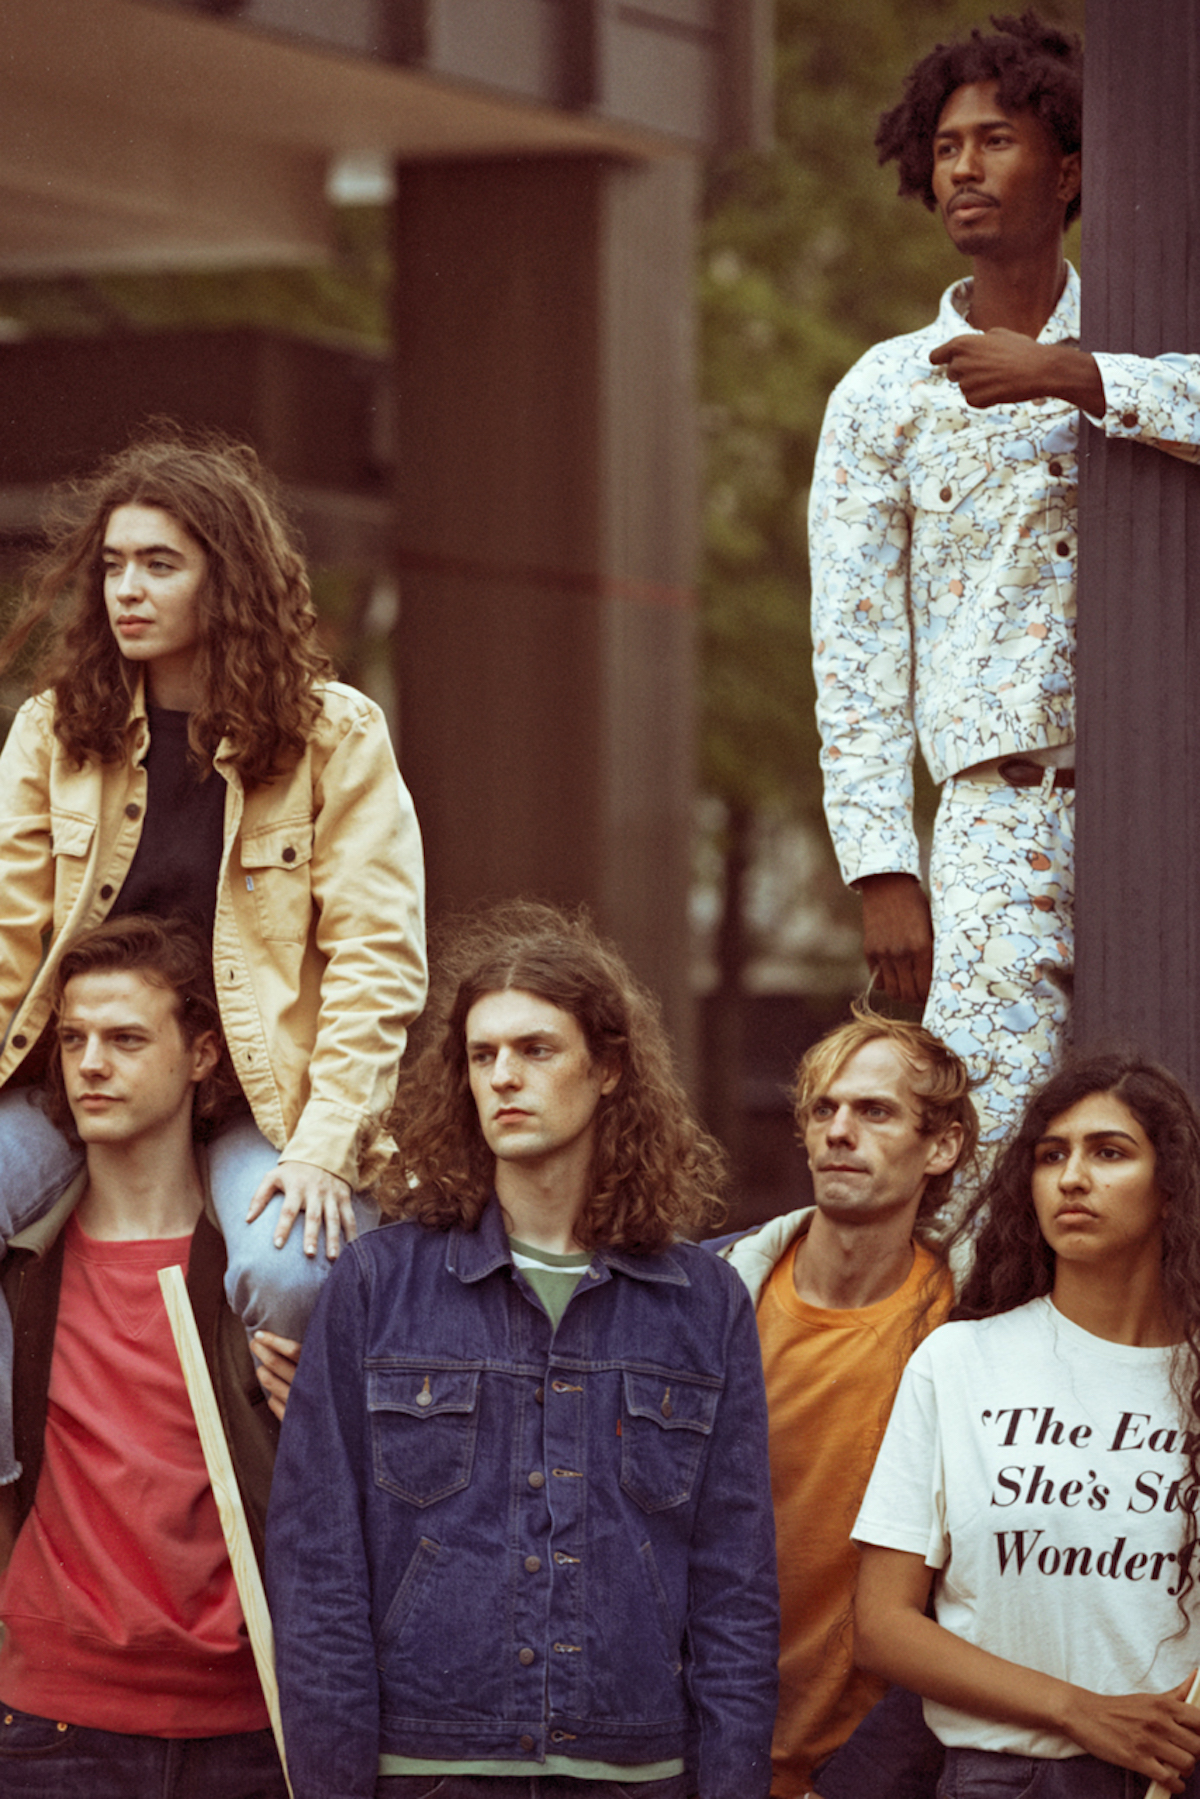 Levi's Vintage Clothing Stay Sustainable With SS22 Collection – PAUSE  Online | Men's Fashion, Street Style, Fashion News & Streetwear